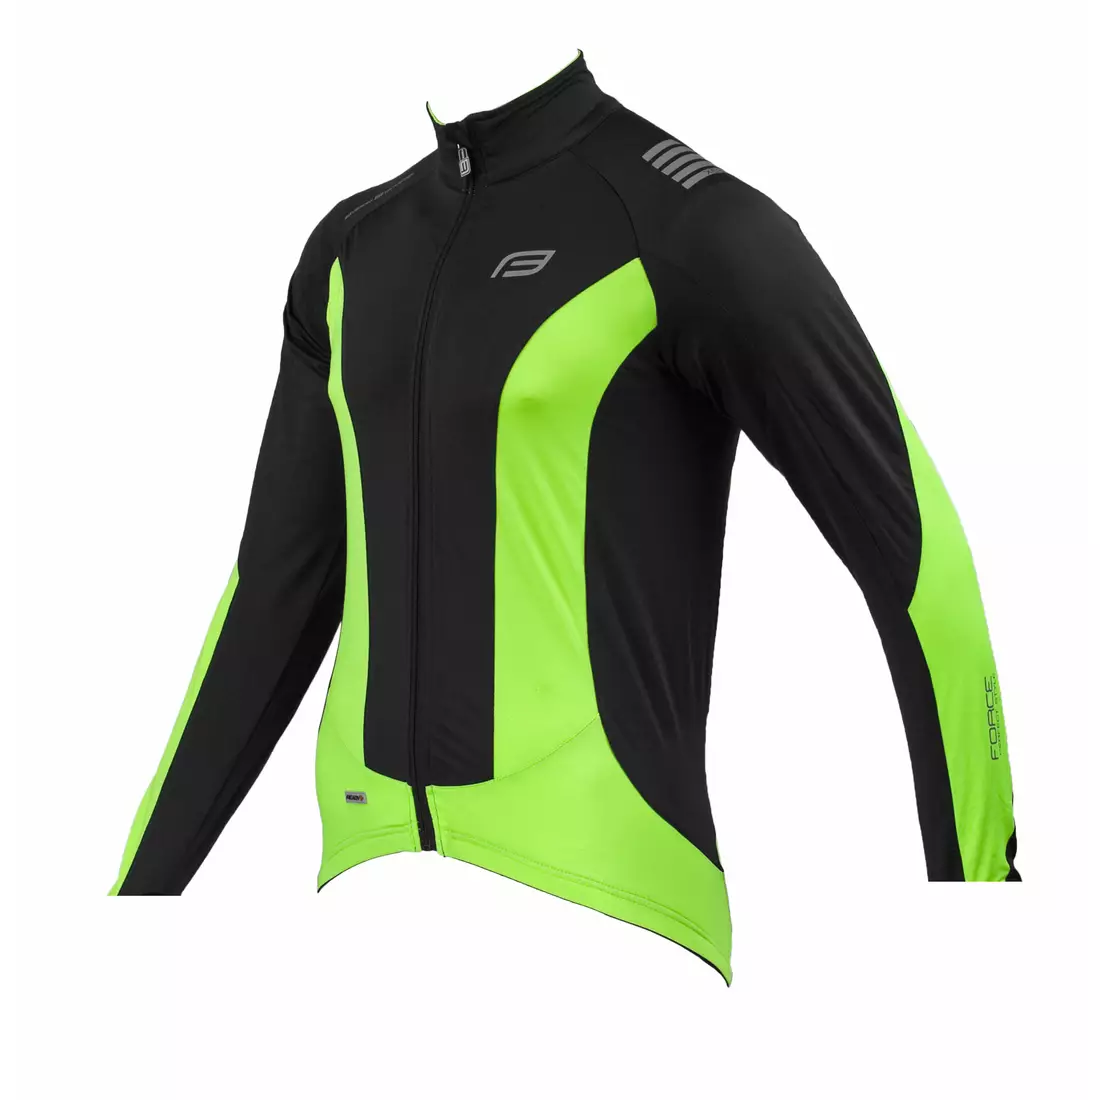 FORCE X68 - 89983 - men's insulated cycling sweatshirt - color: Black-fluor